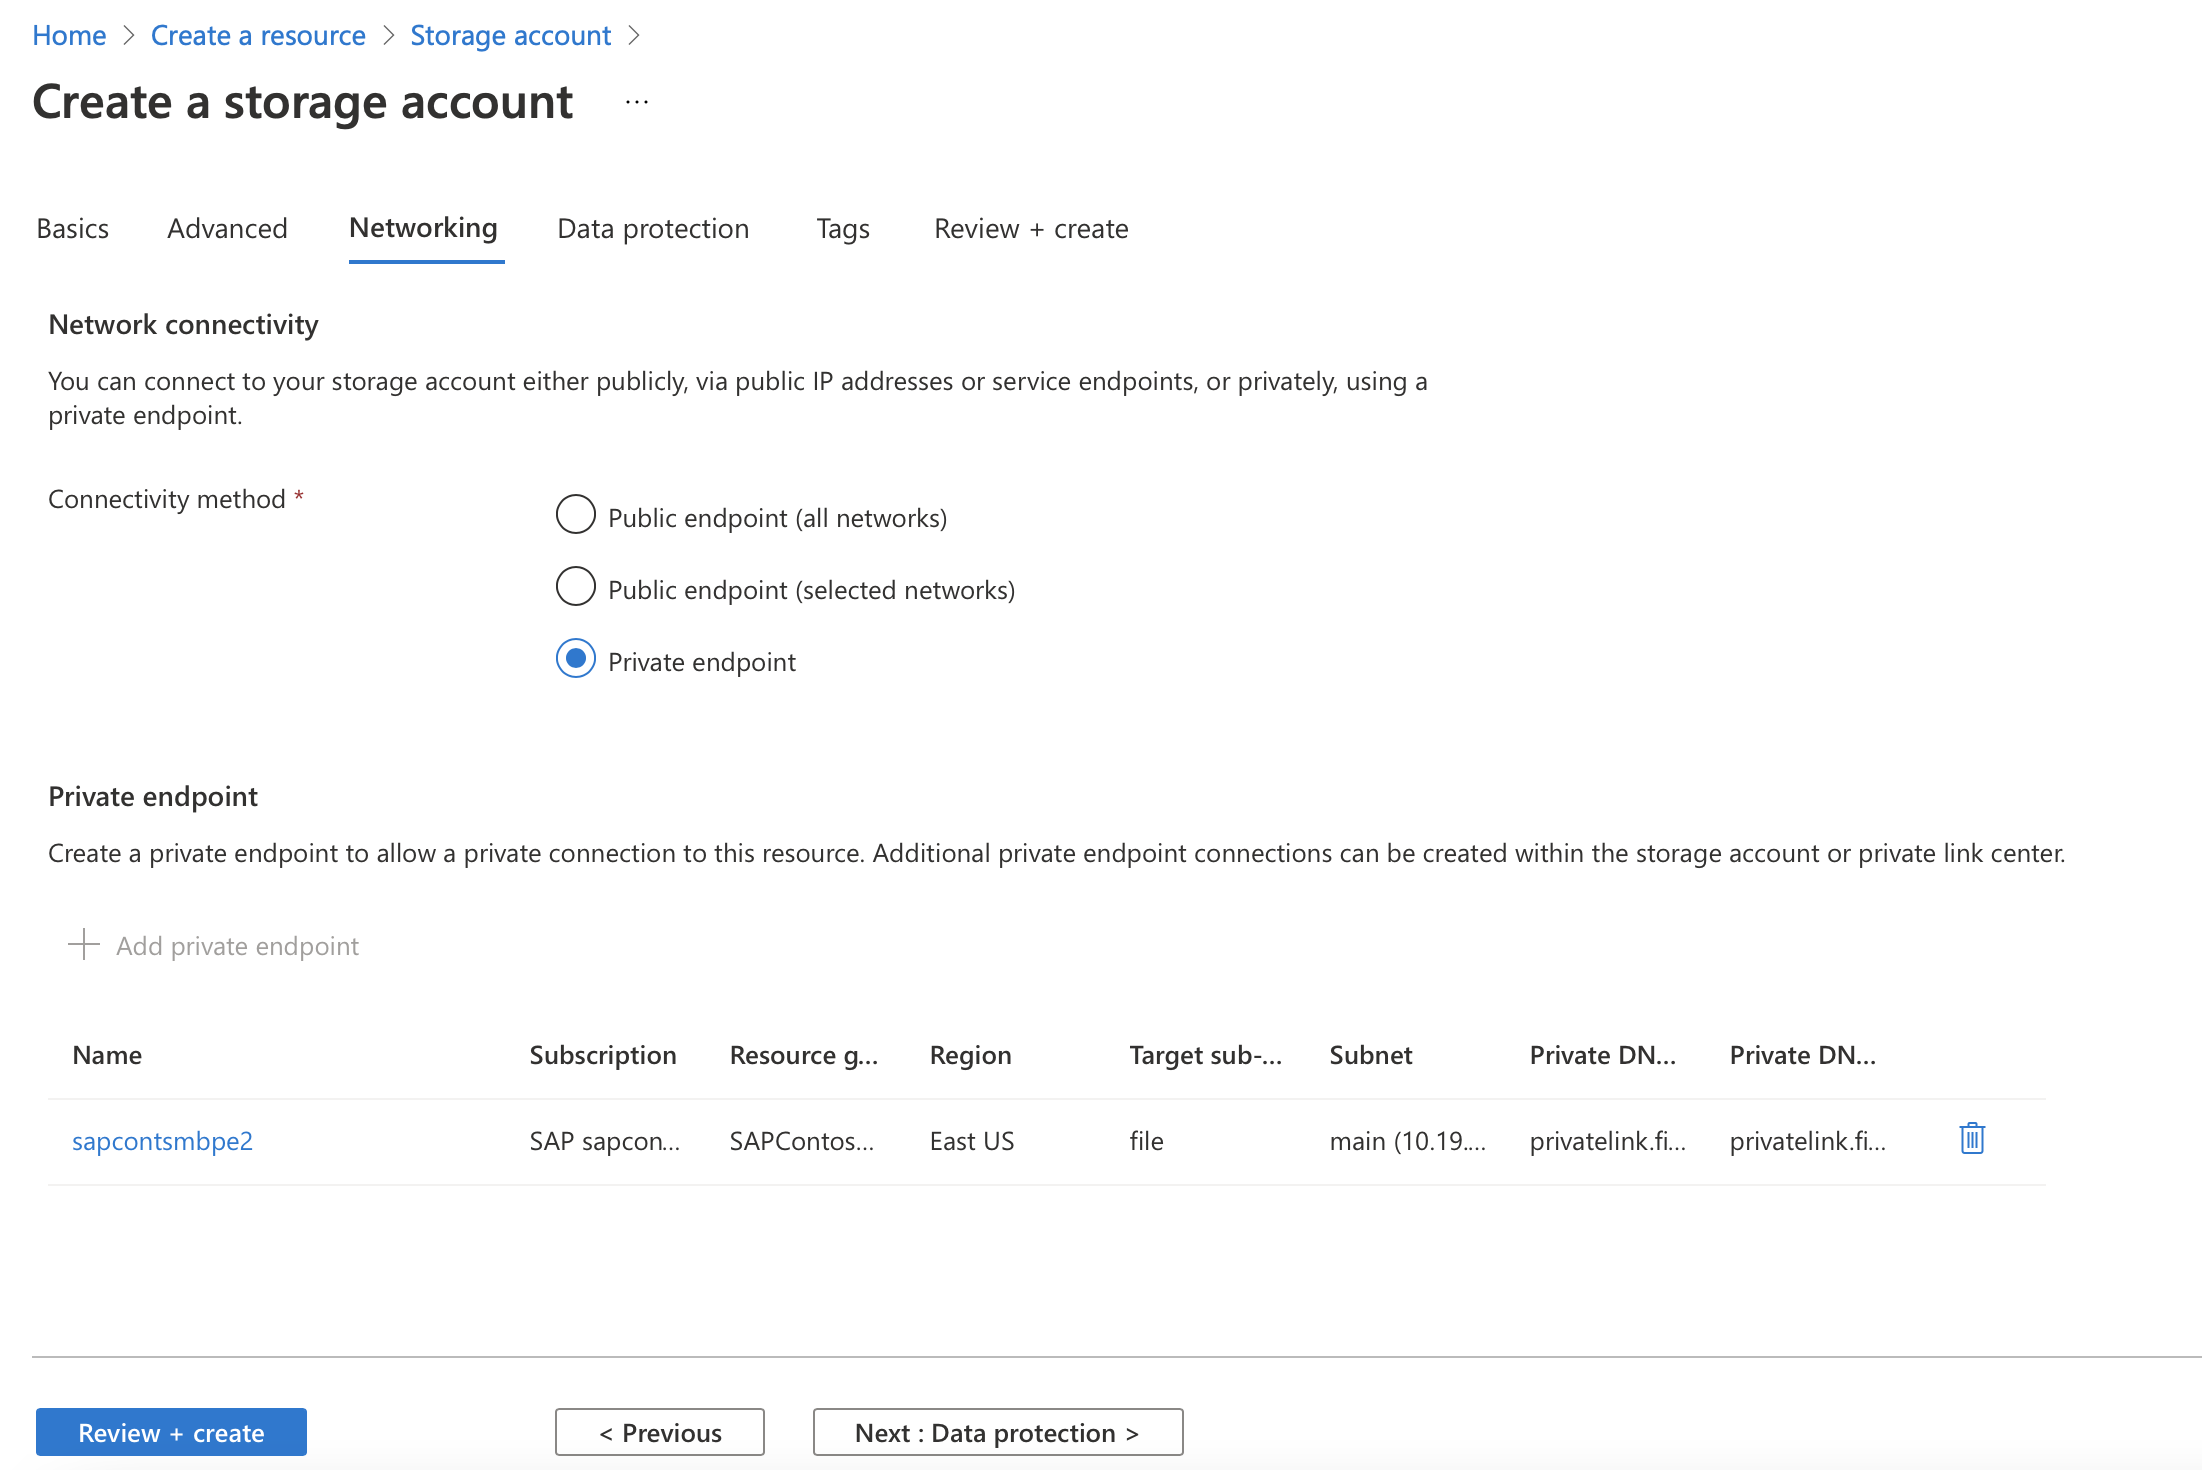 Screenshot of the Azure portal that shows networking information for creating a storage account.